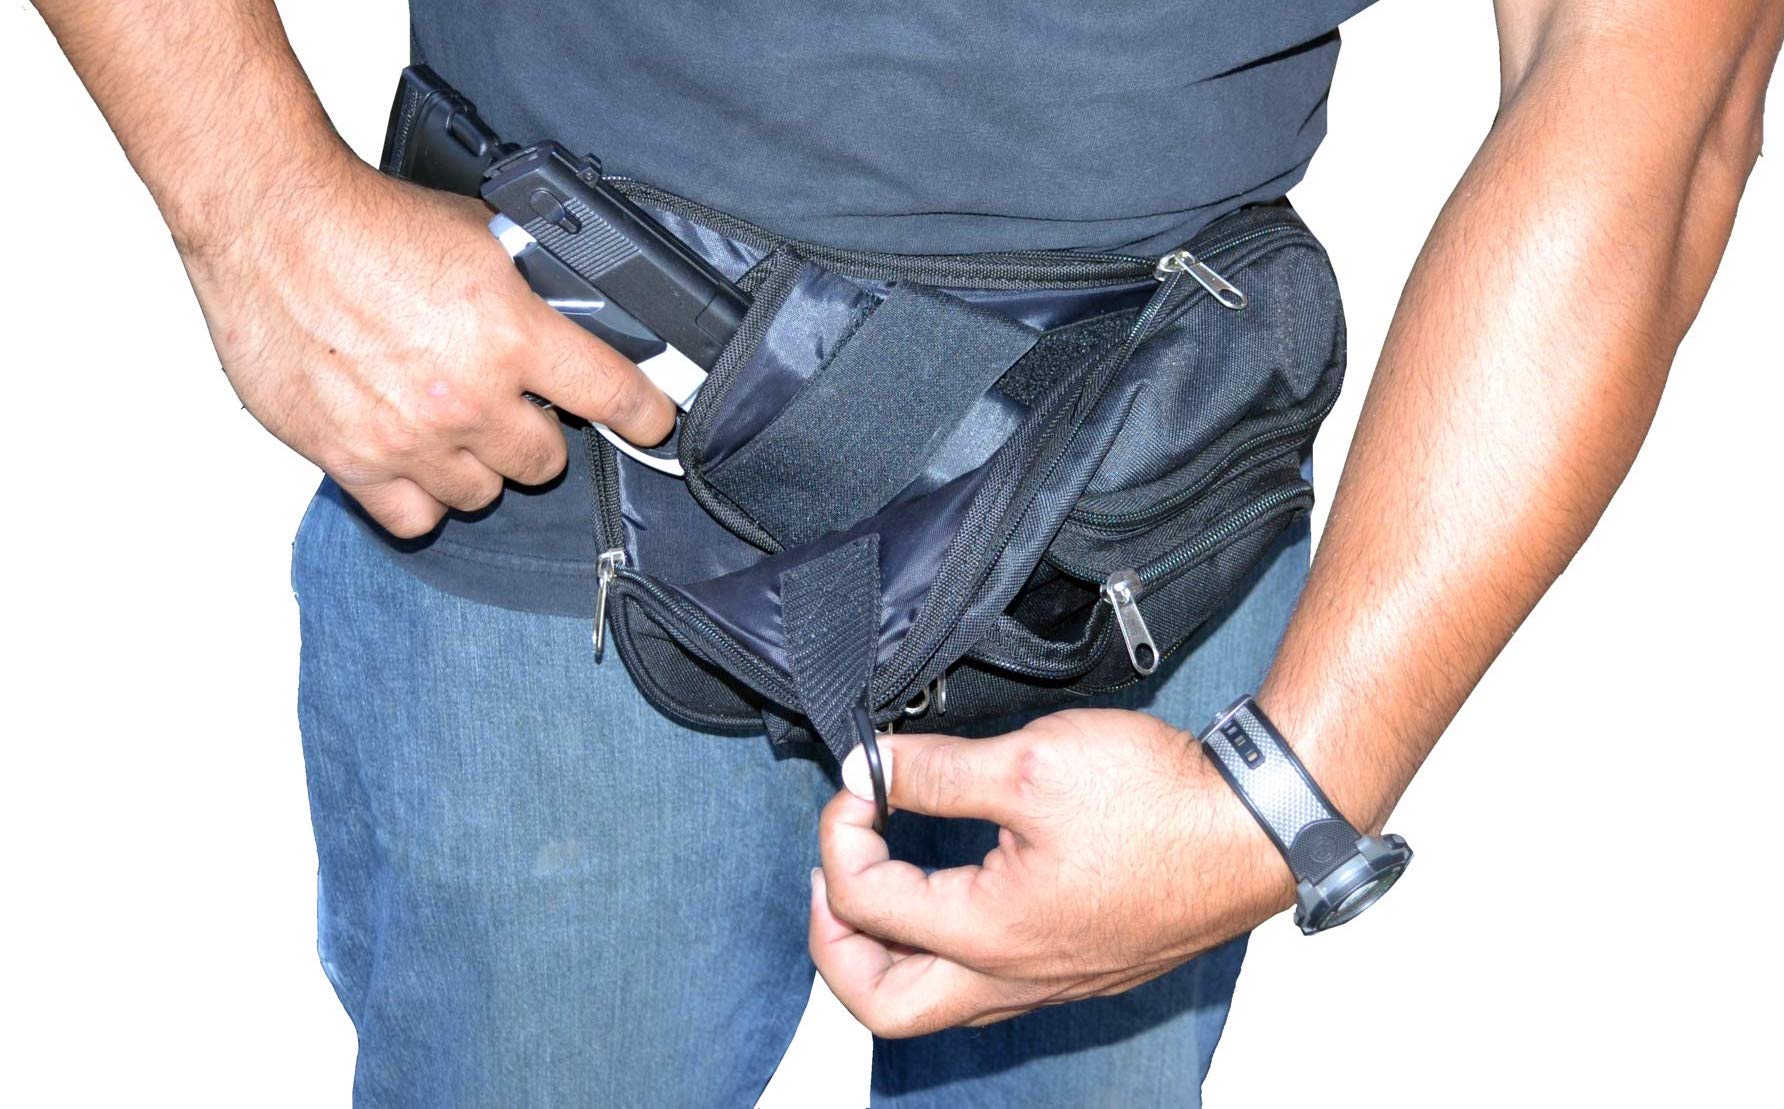 conceal carry fanny pack